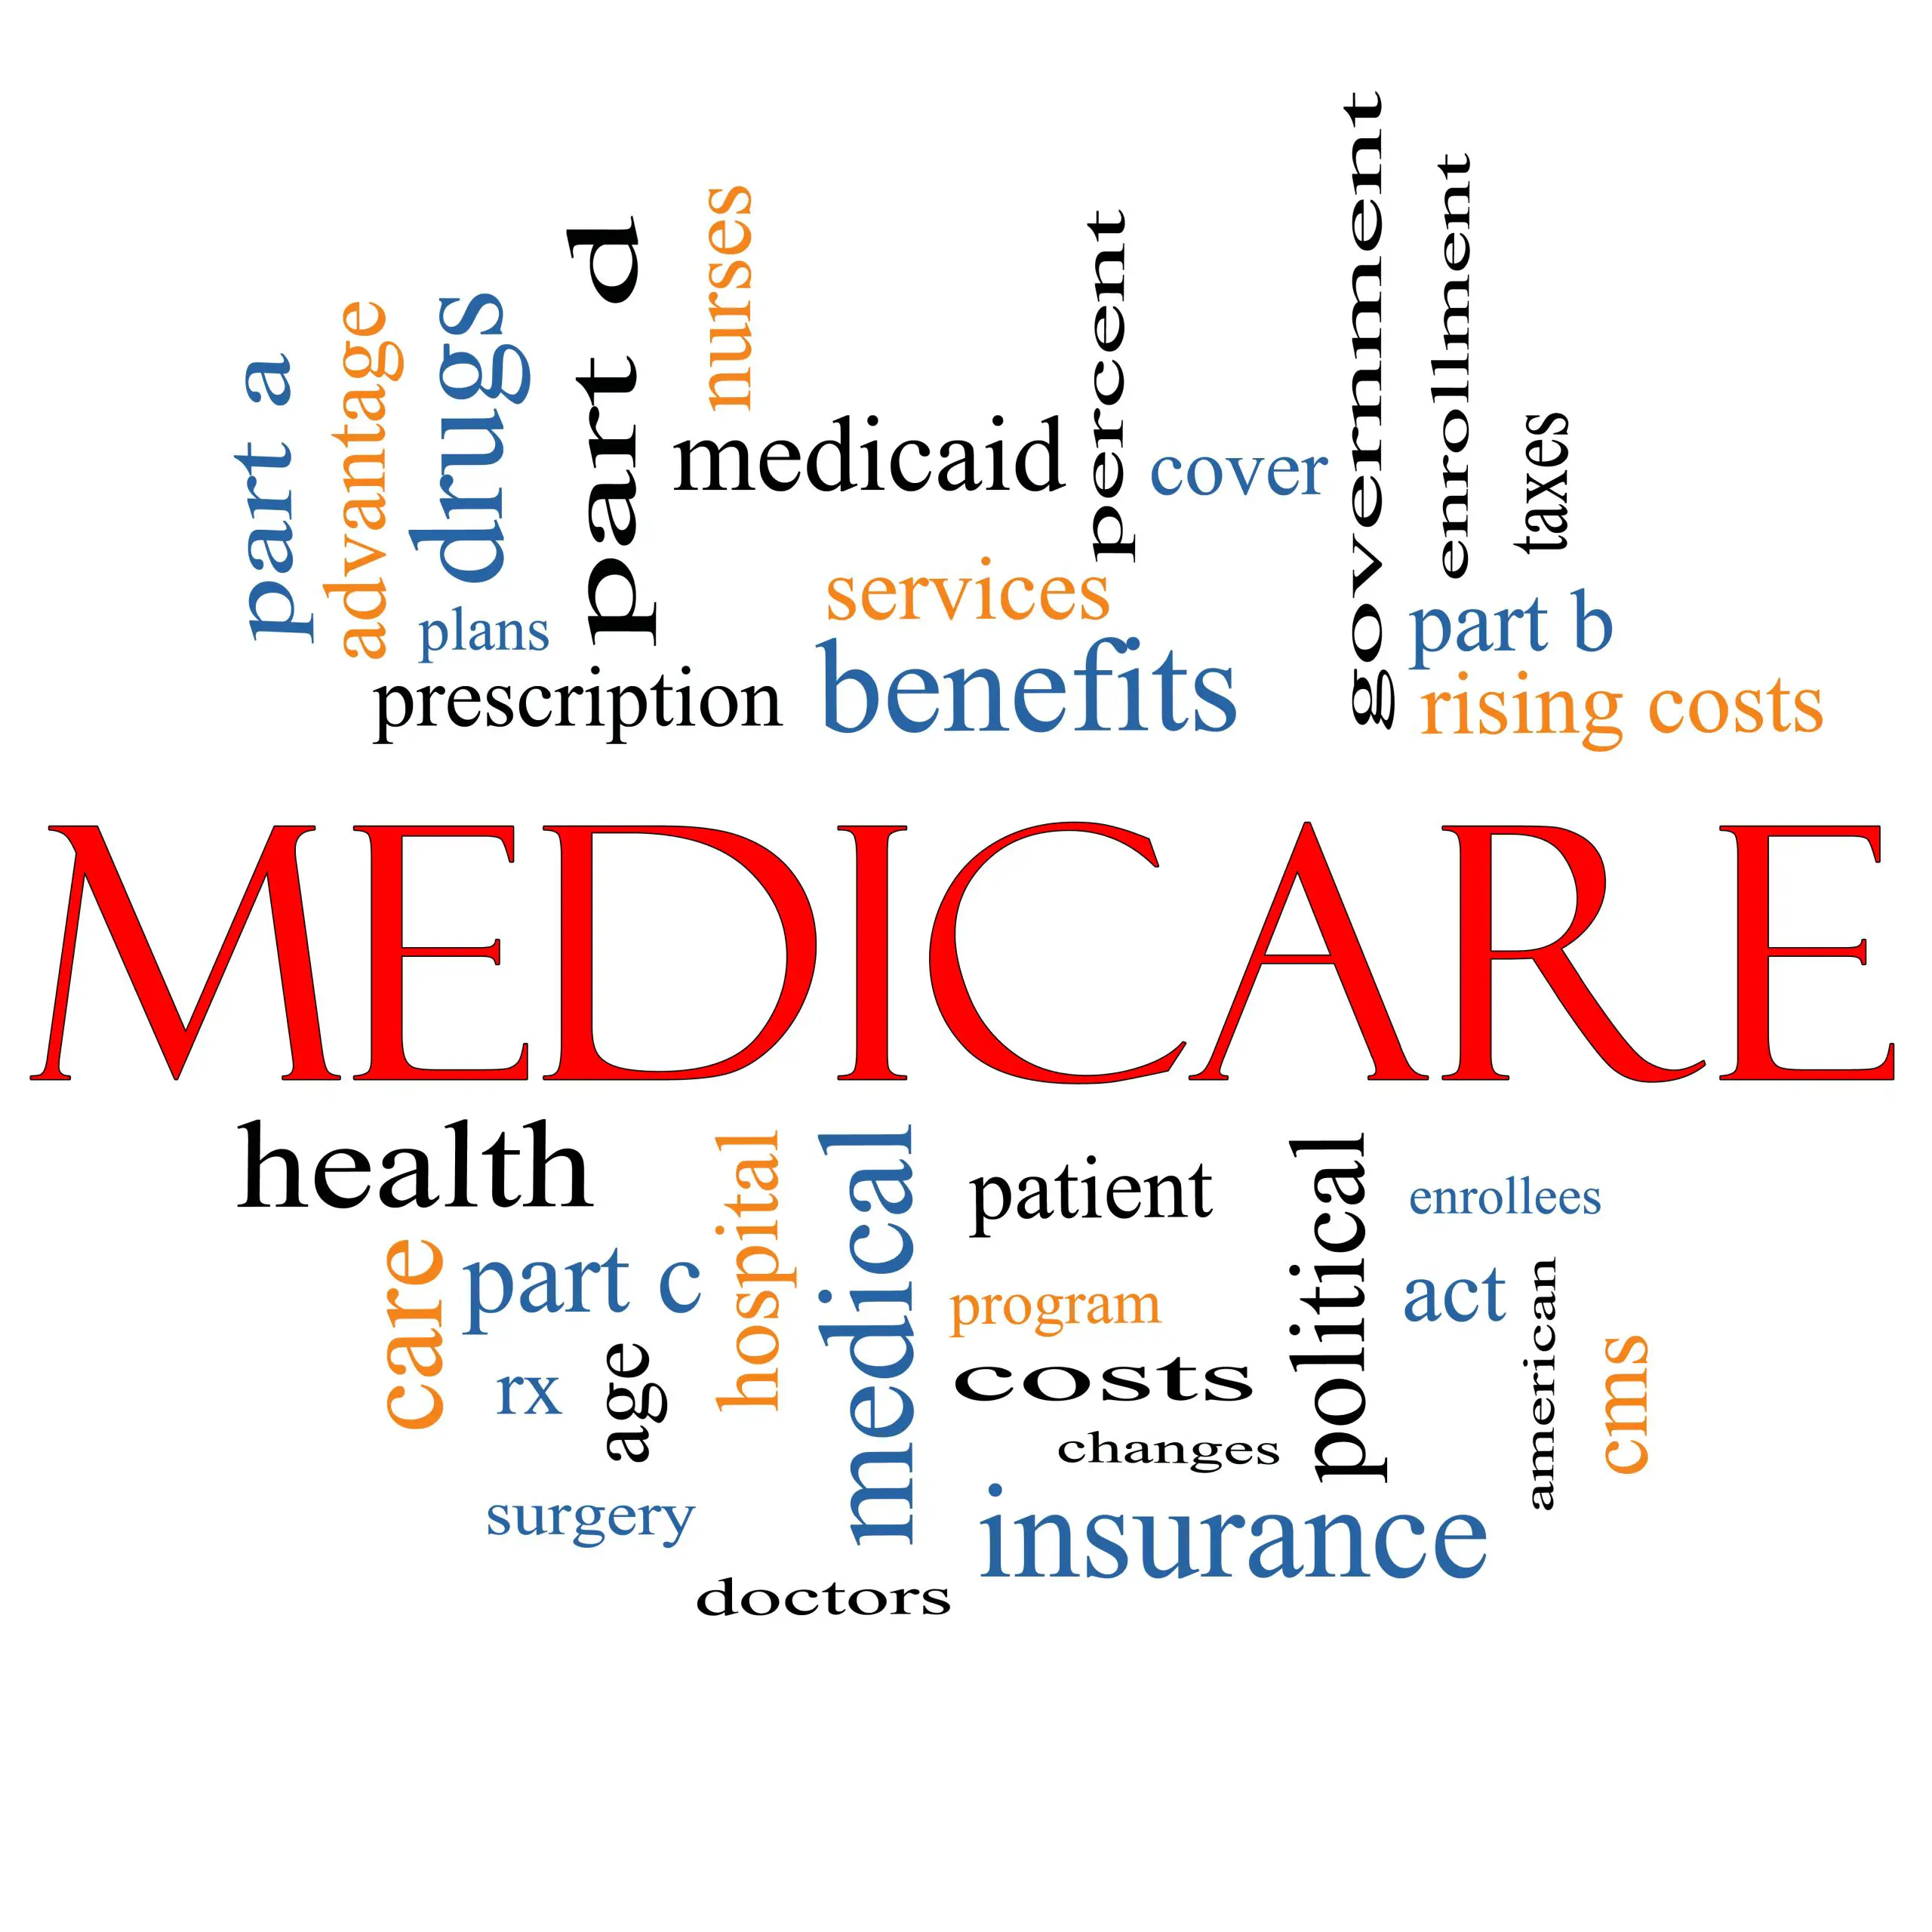 Types Of Medicare Plans